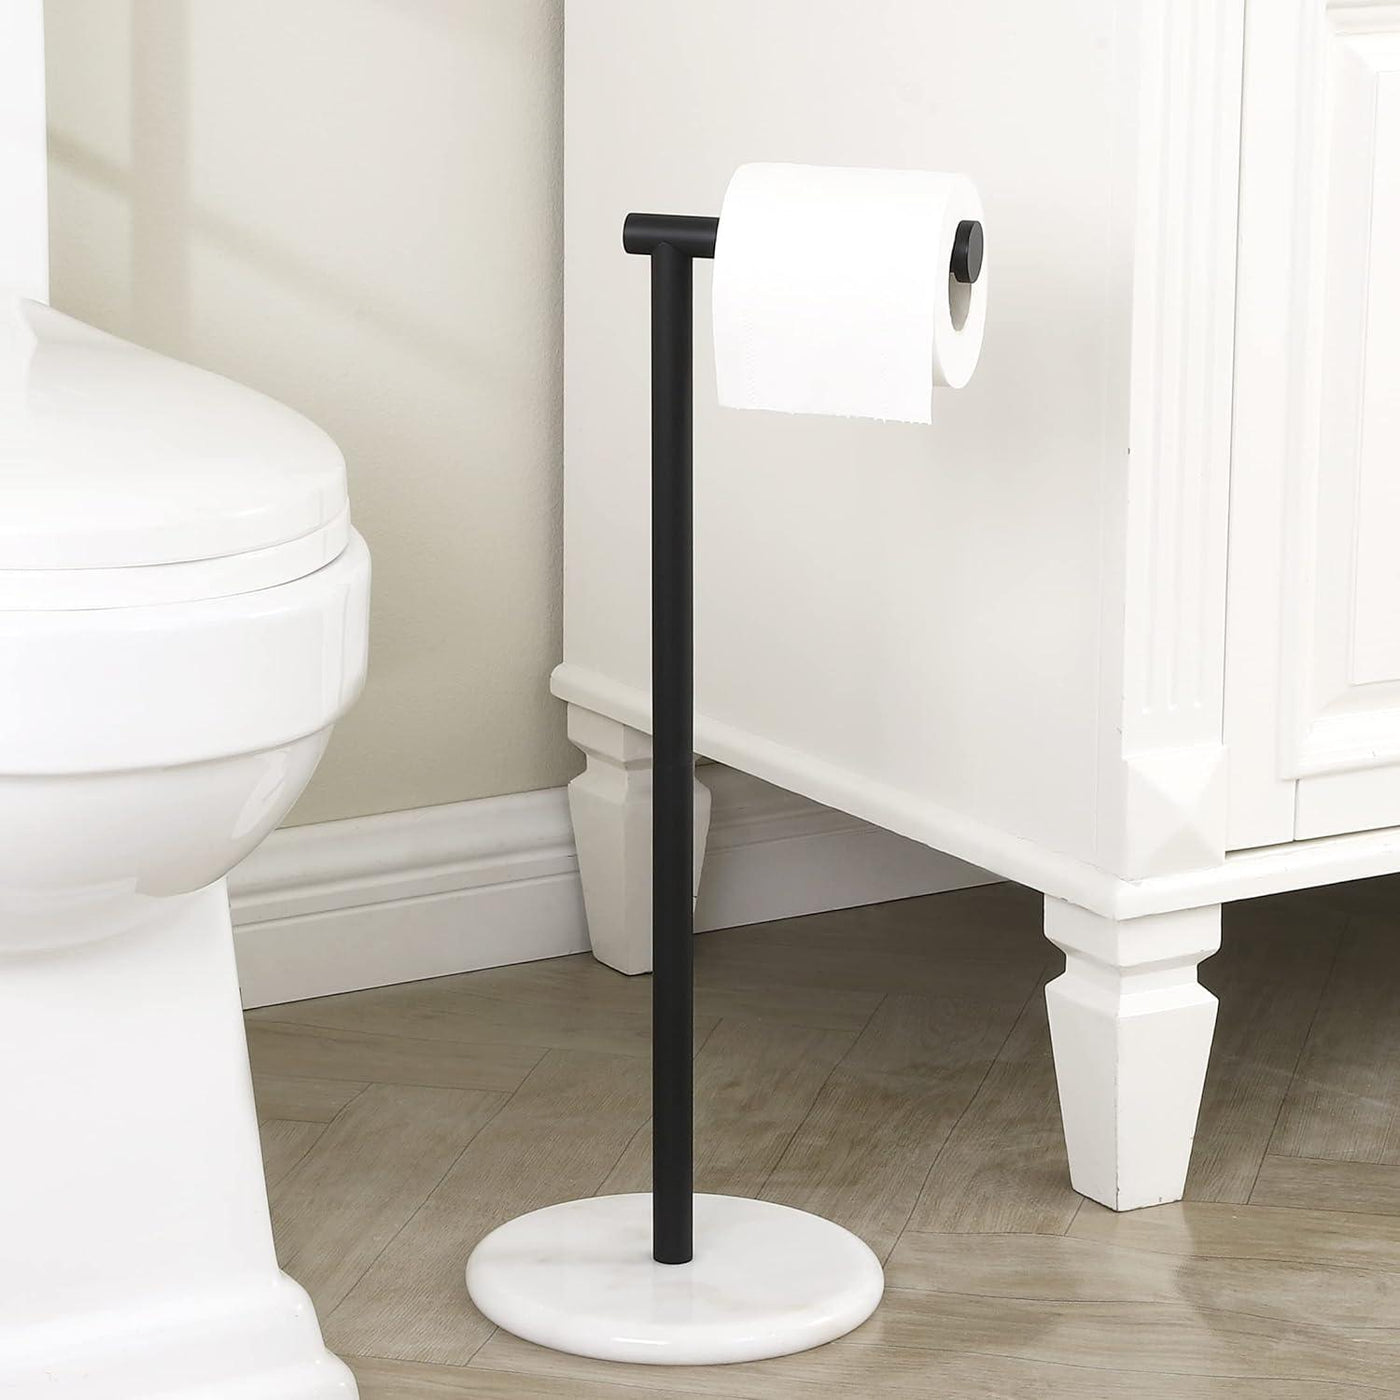 KES Toilet Roll Holder Free Standing, Marble Base Silver/ Gold/ Black - Massive Discounts